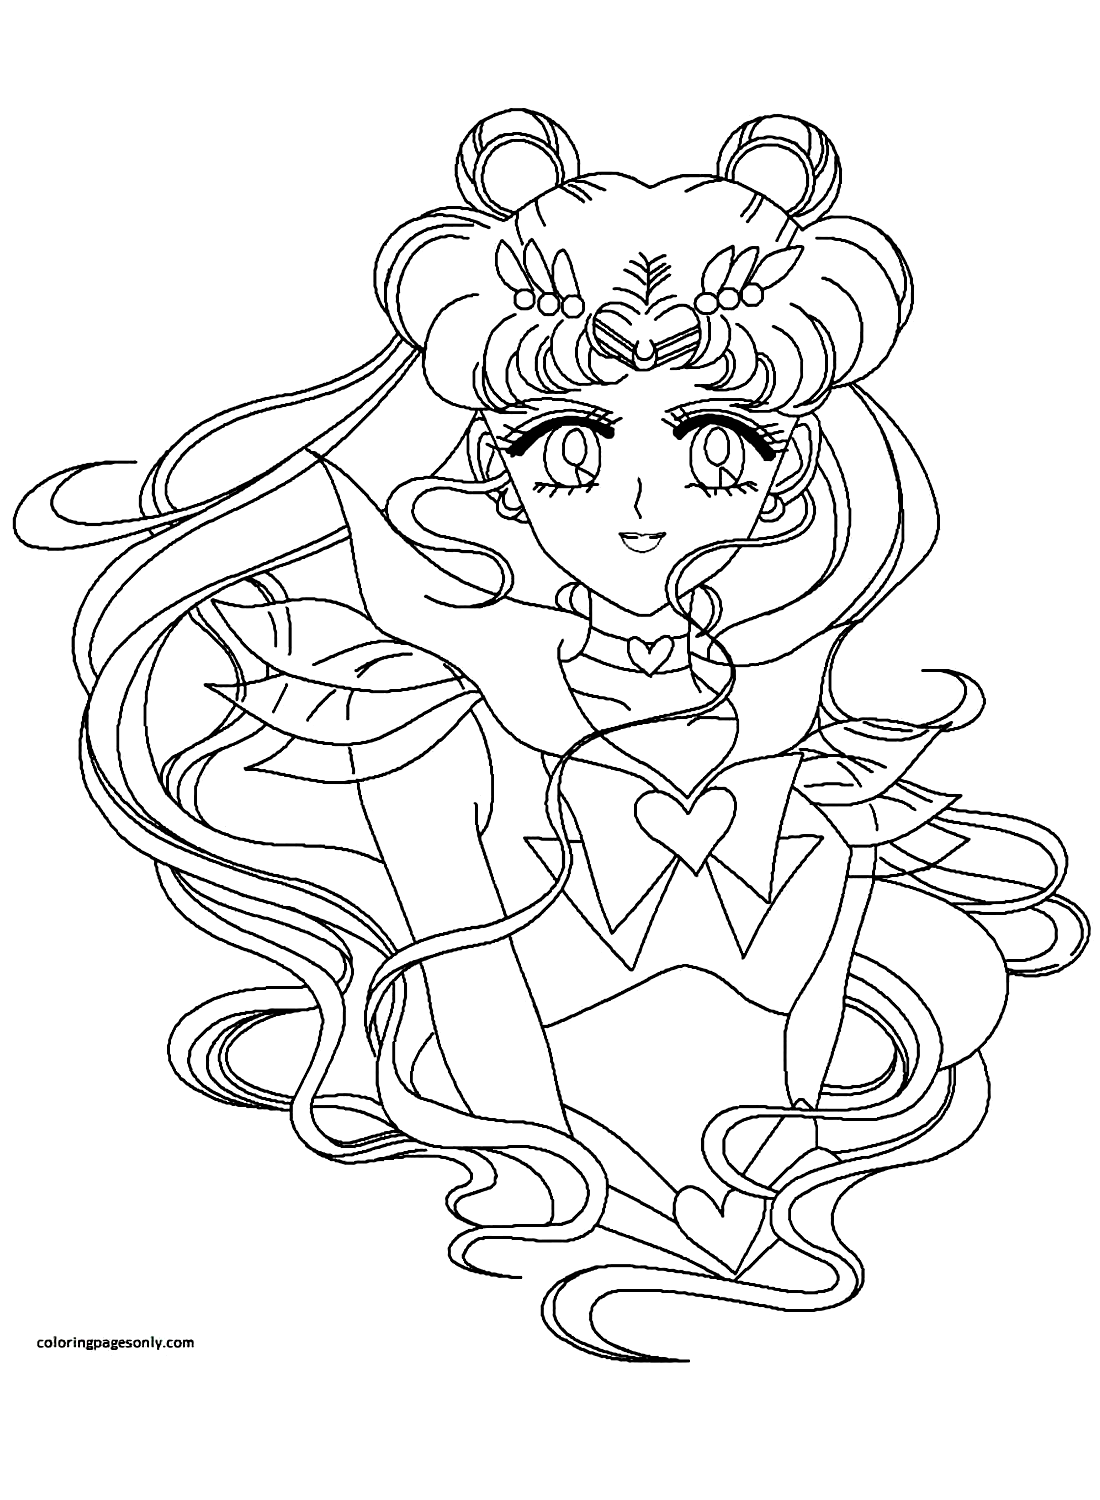 Sailor Moon 12 Coloring Pages